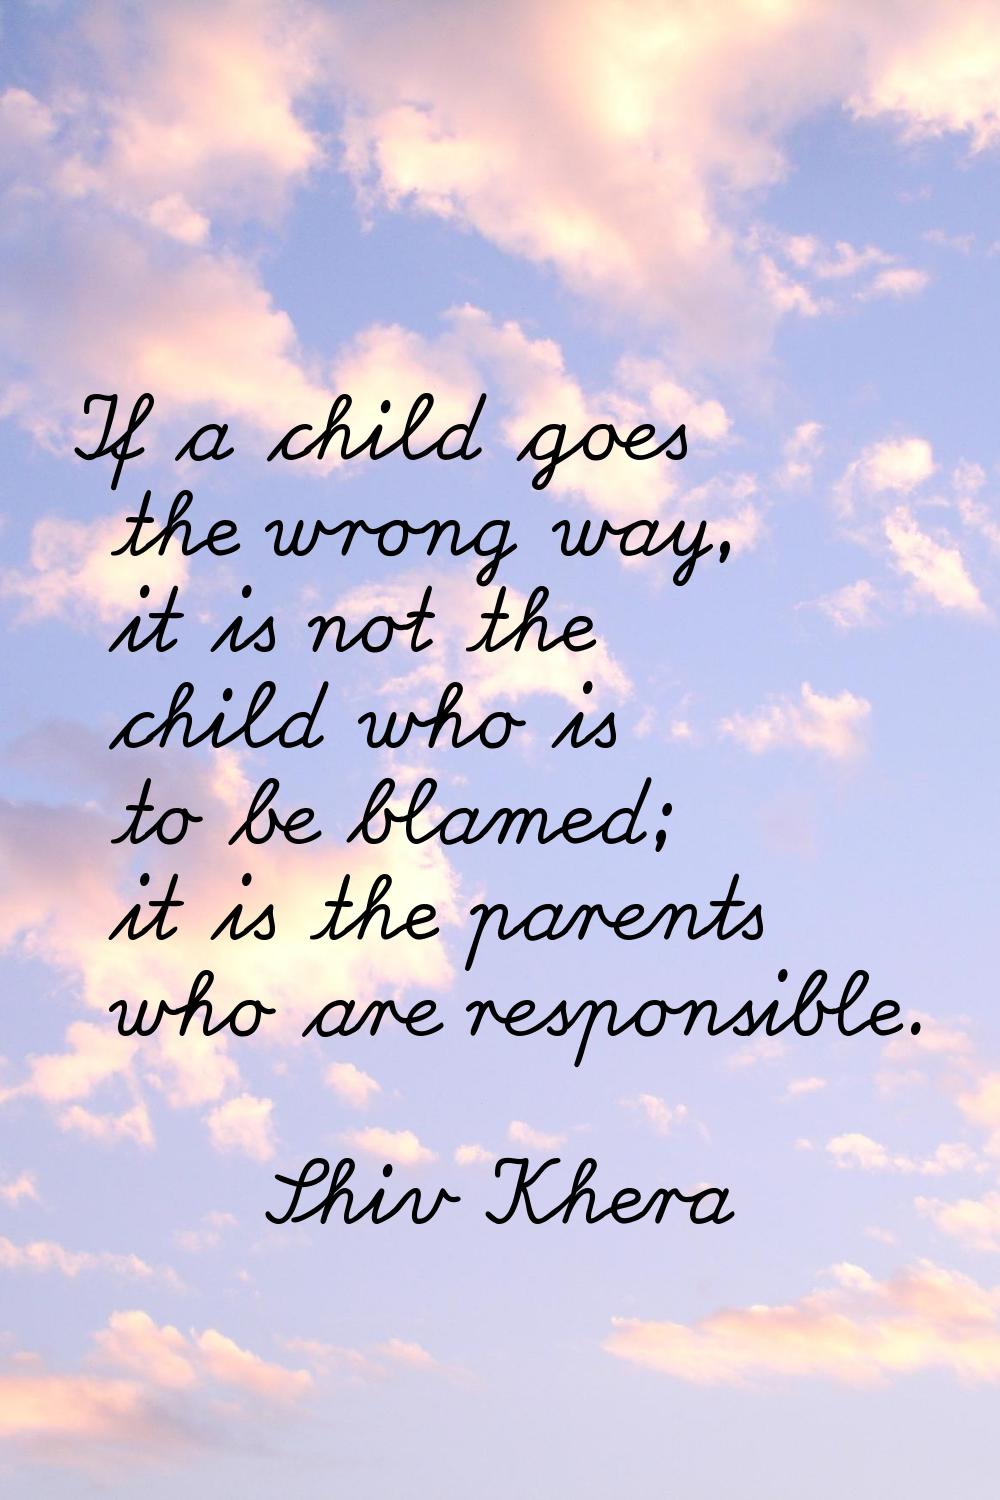 If a child goes the wrong way, it is not the child who is to be blamed; it is the parents who are r